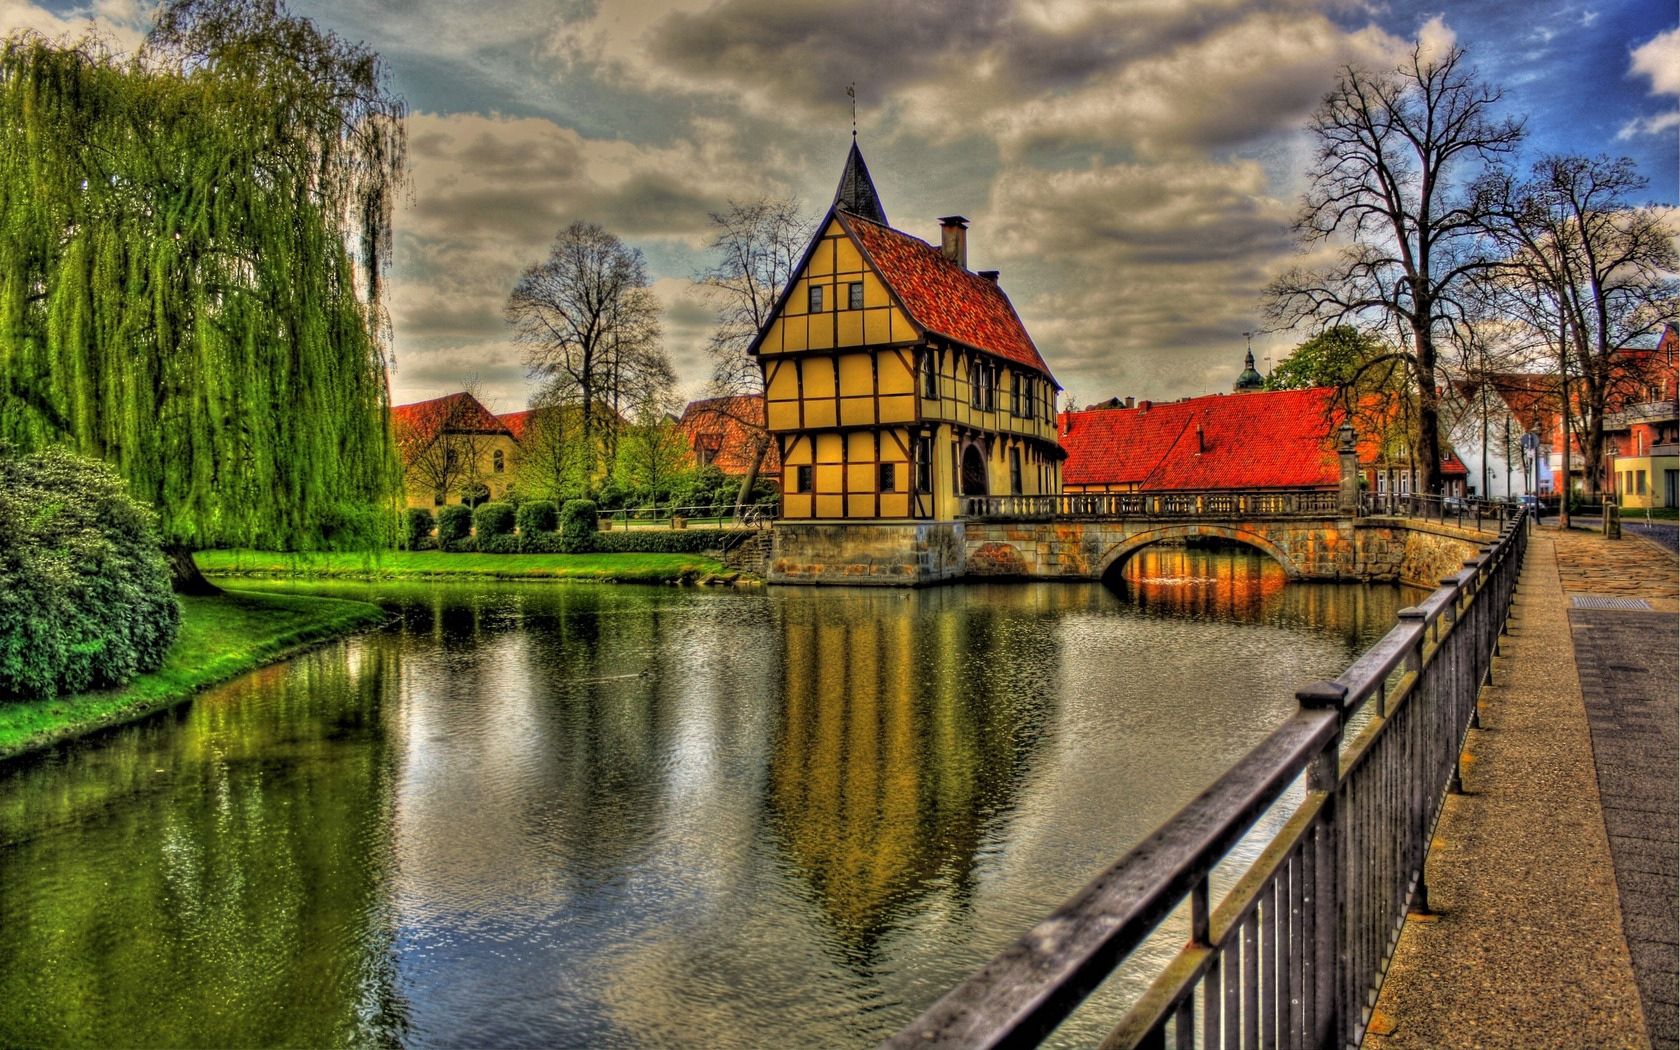 architecture, hdr, cities, rivers, germany, grass, trees, green, water, houses, sky, clouds, city, reflection, road, beauty, house, bridge, colors, color, view, colorful QHD